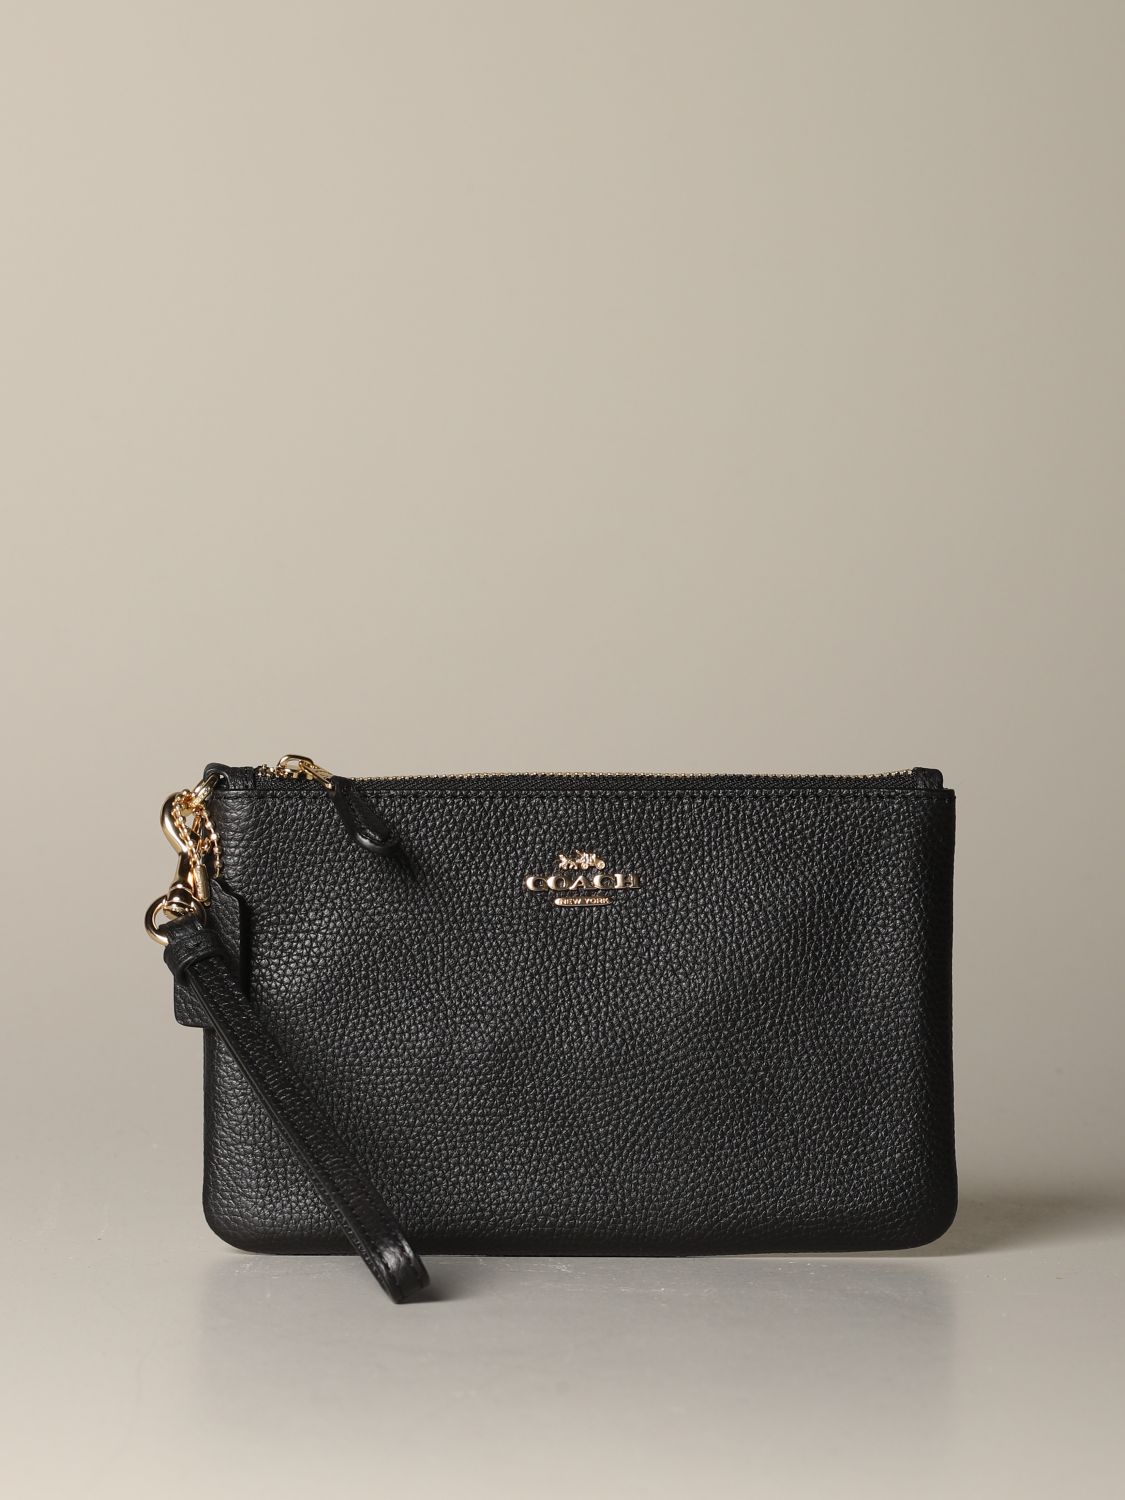 COACH: envelope clutch in textured leather - Black